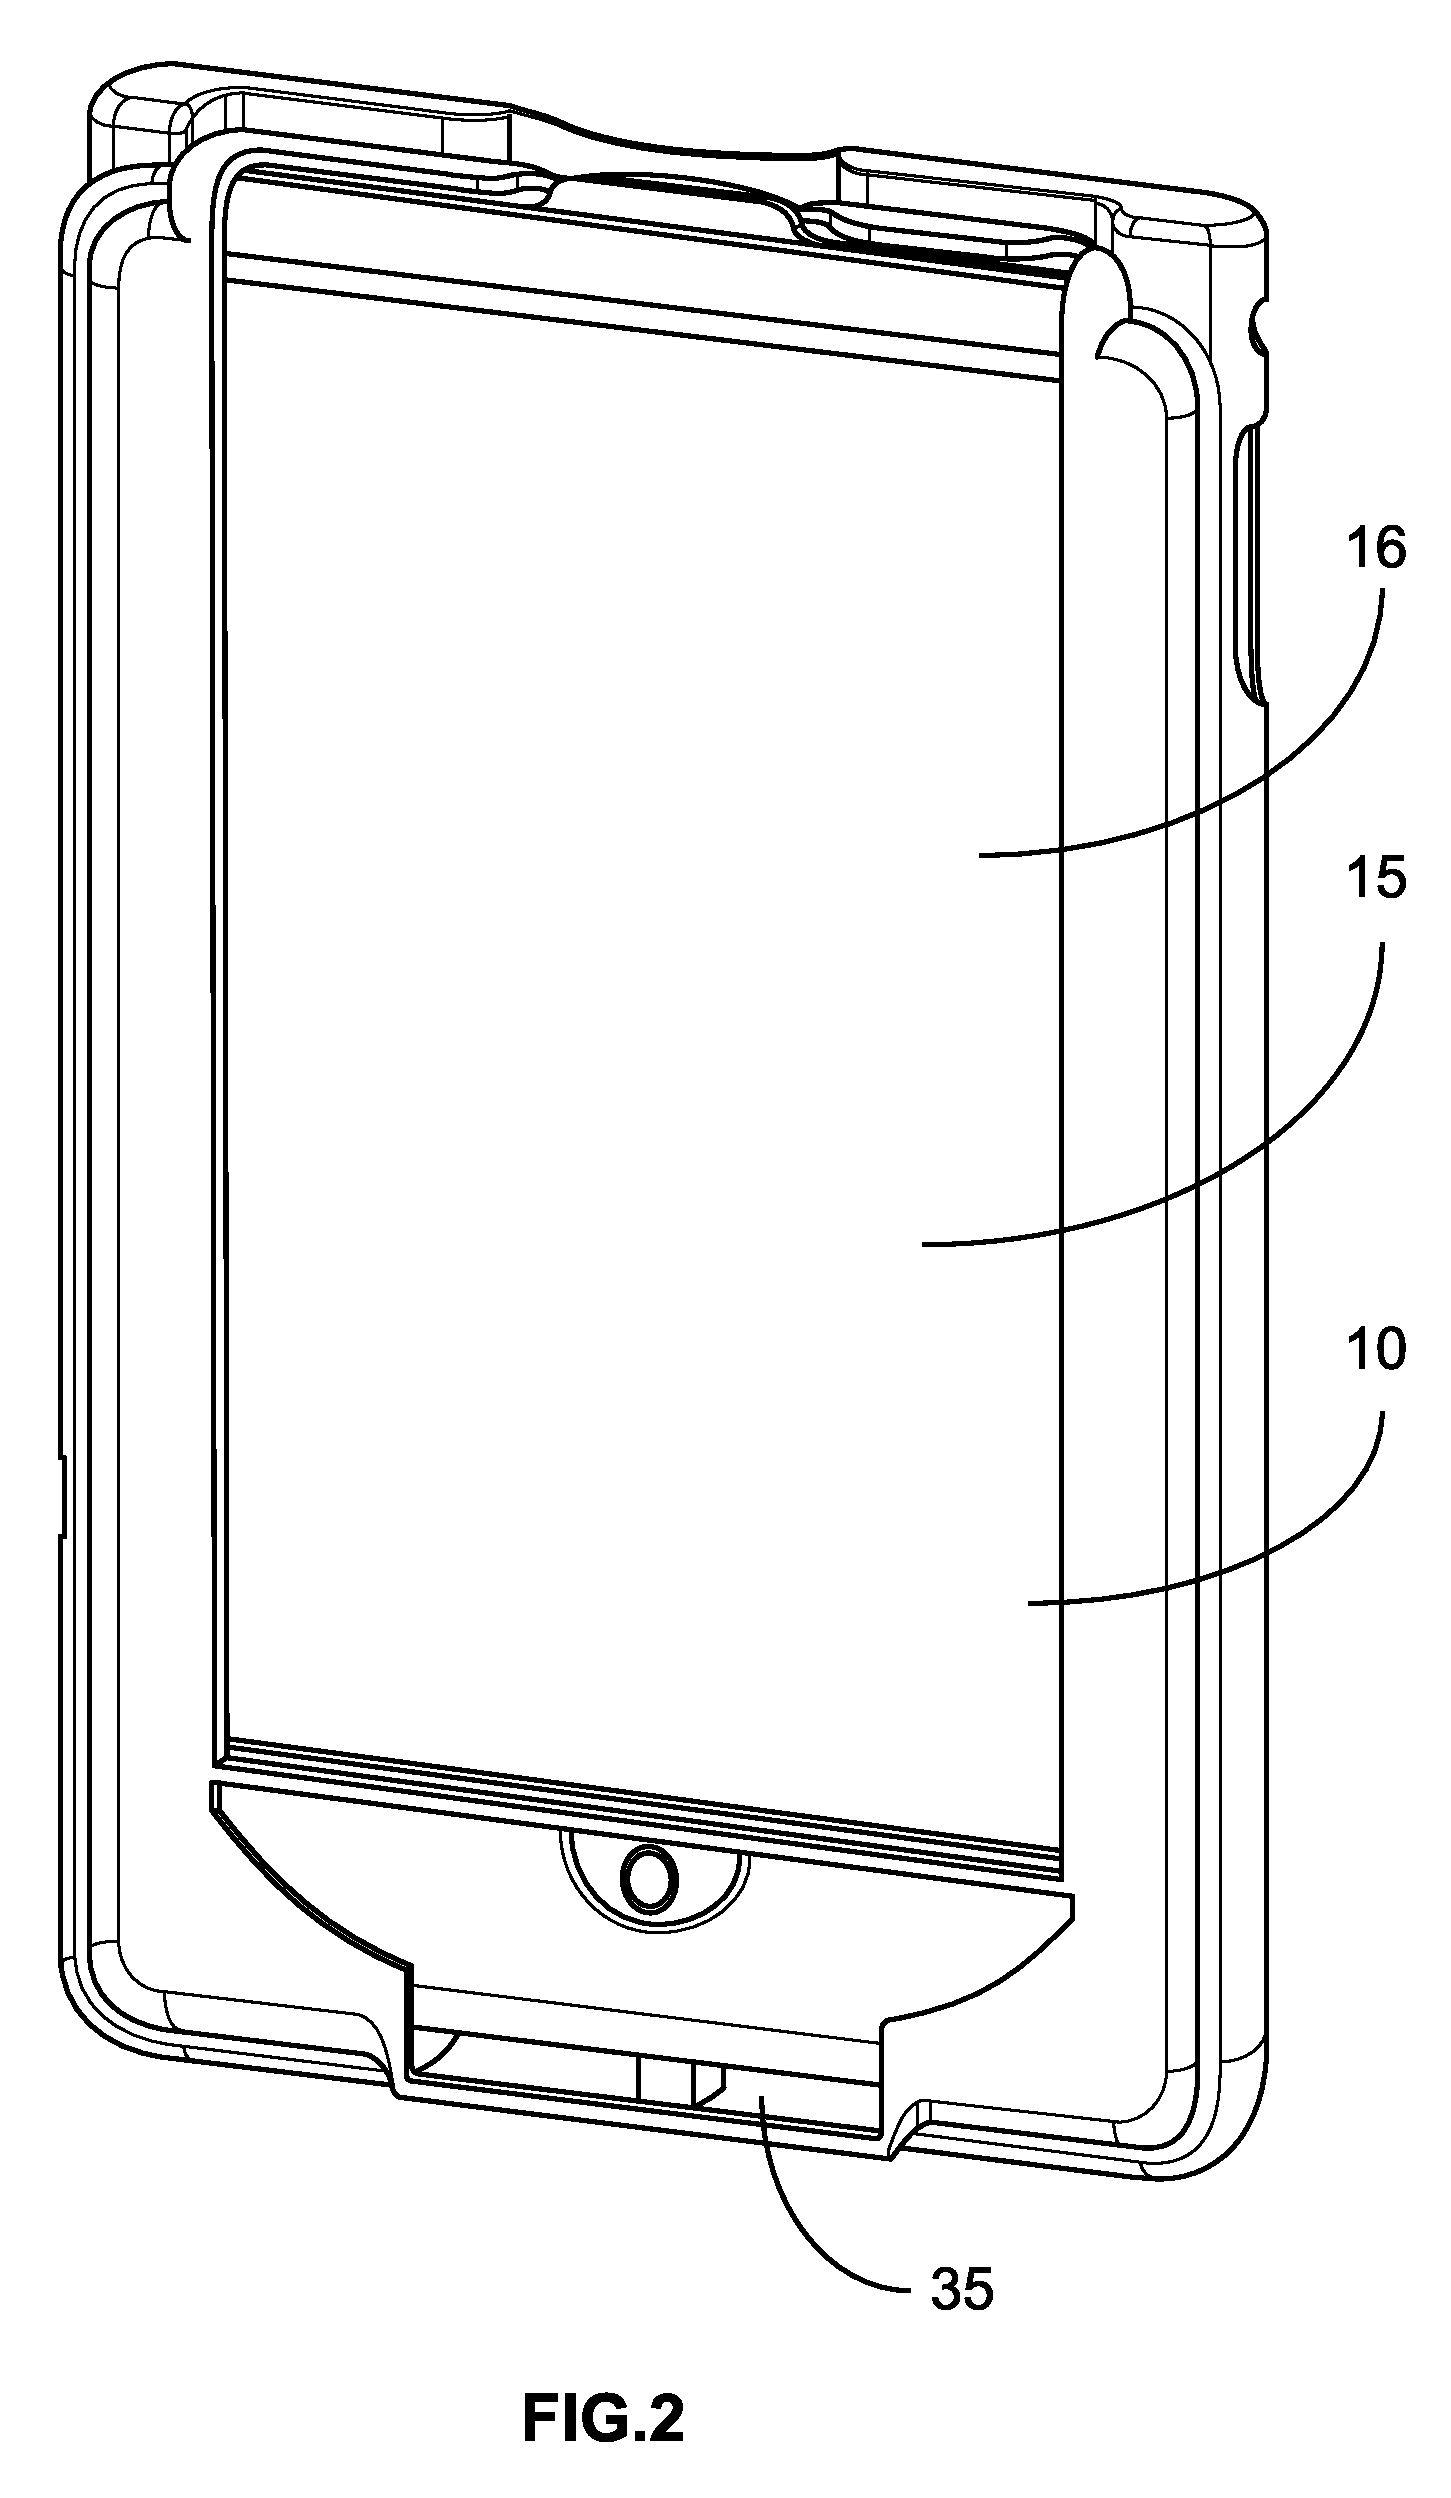 Roll-back cover for an electronic device